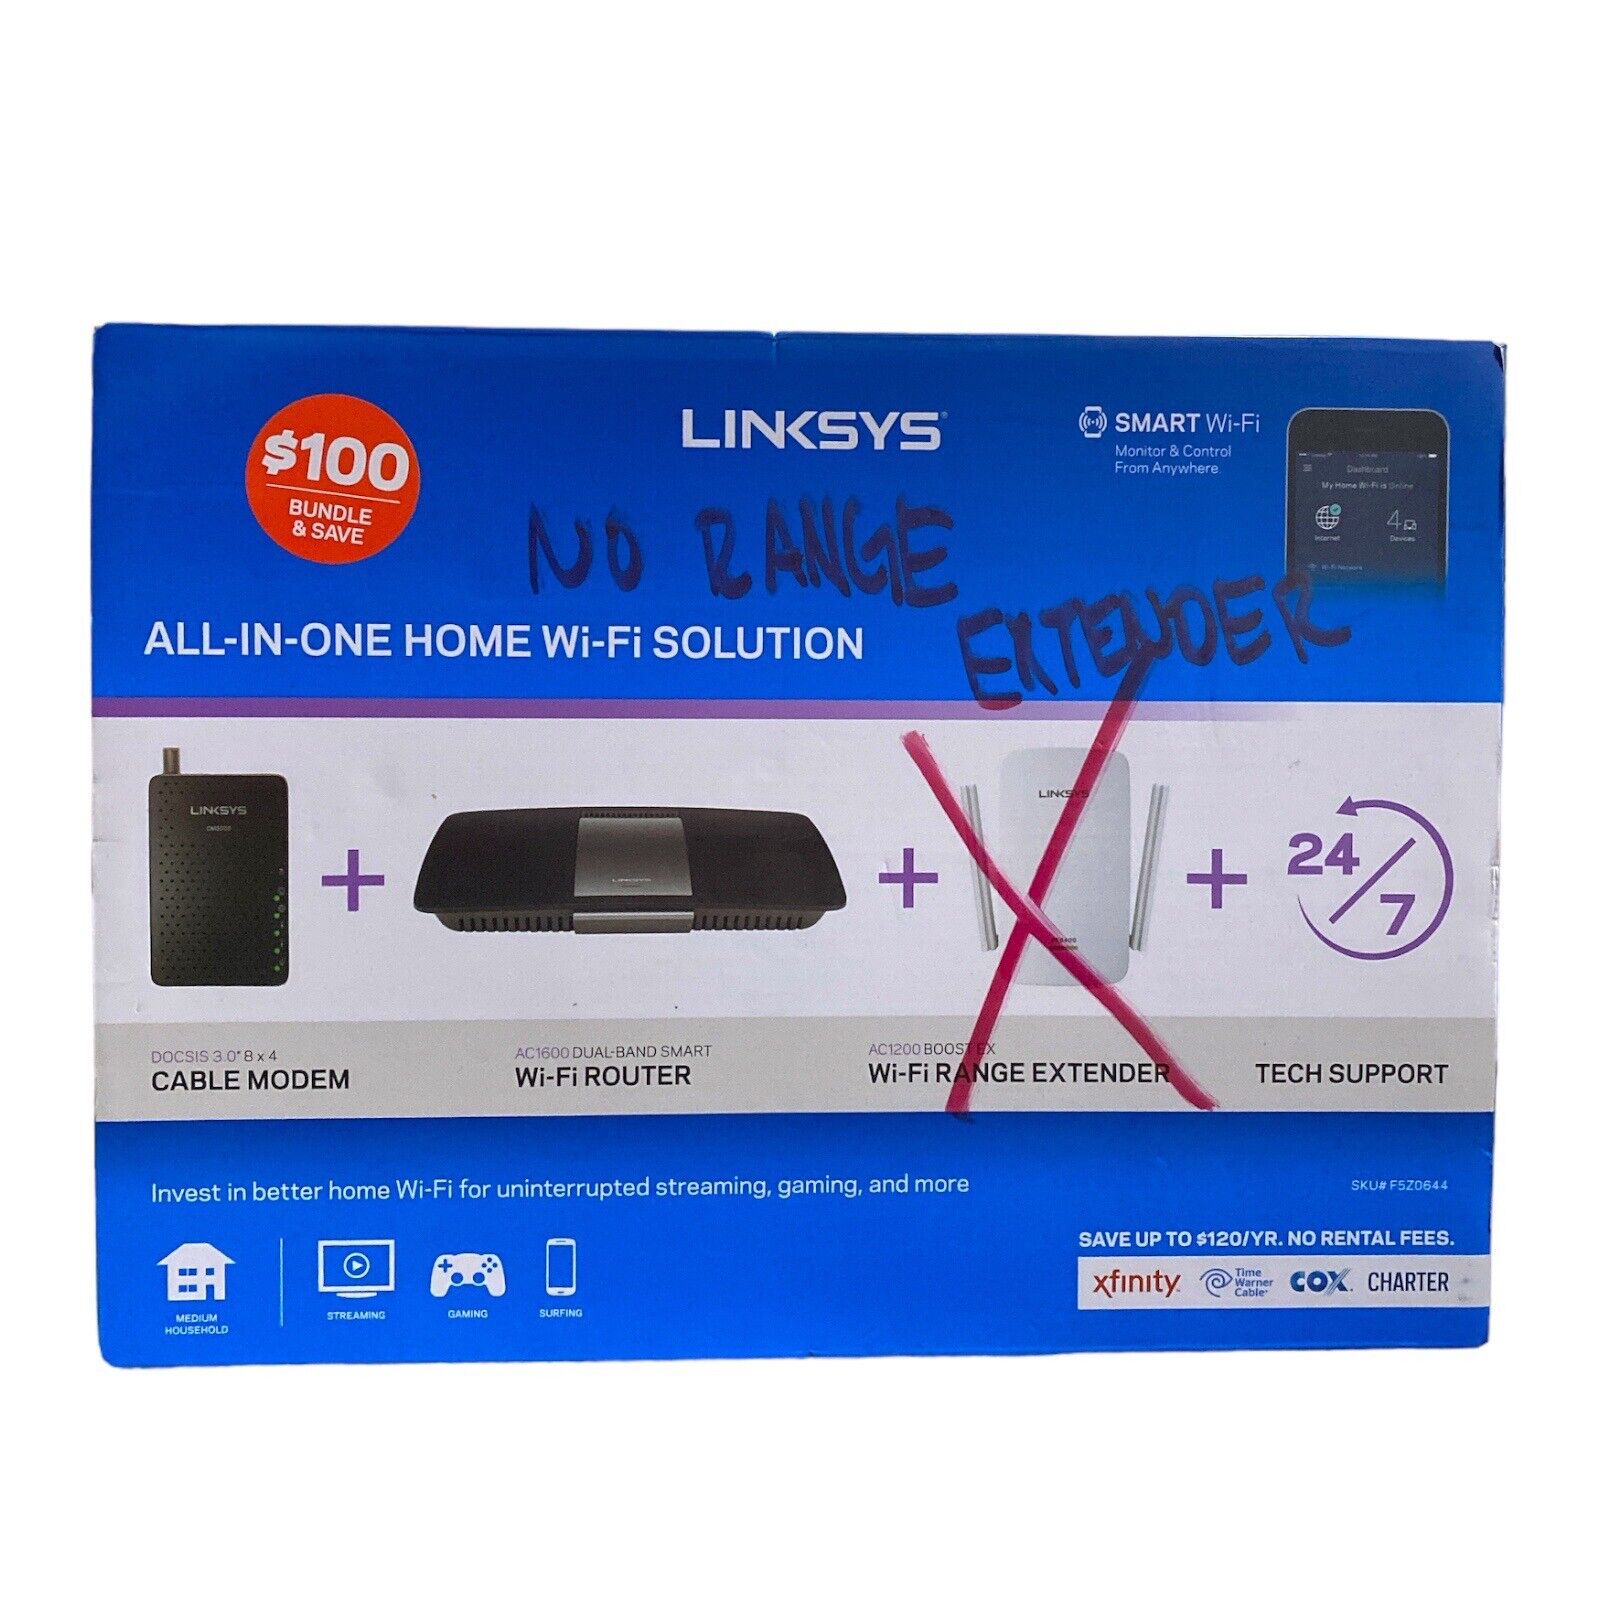 Linksys Docsis 3.0 Cable Modem & AC1600 Smart WiFi Router New - NO Extender